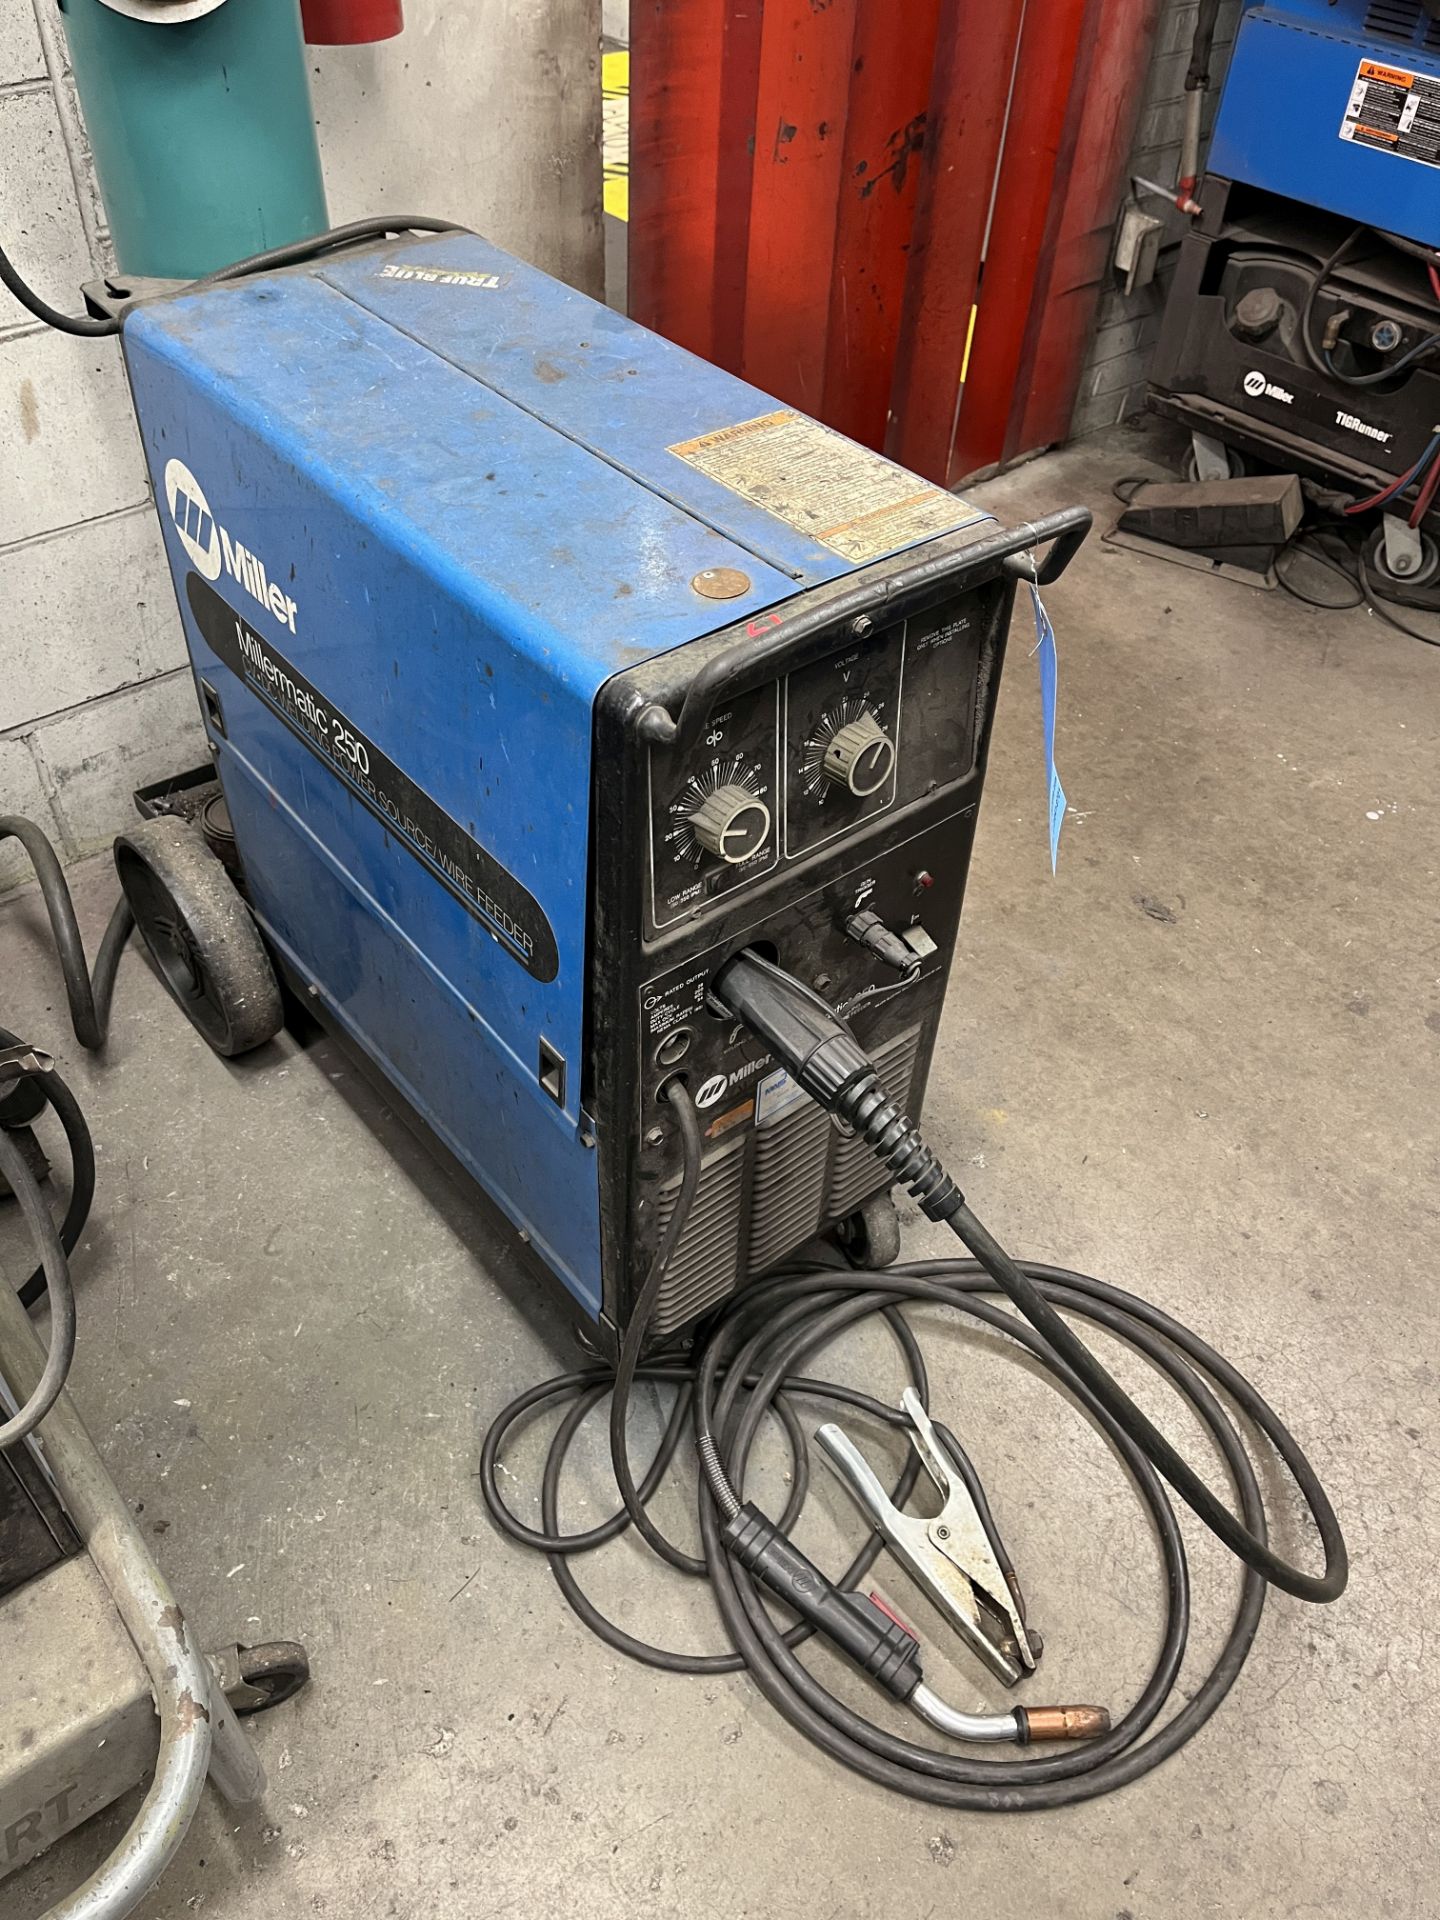 MILLER MODEL MILLERMATIC 250 CV/DC ARC WELDER; S/N KG068432, WITH INTERNAL WIRE FEED, CABLE WITH - Image 3 of 12